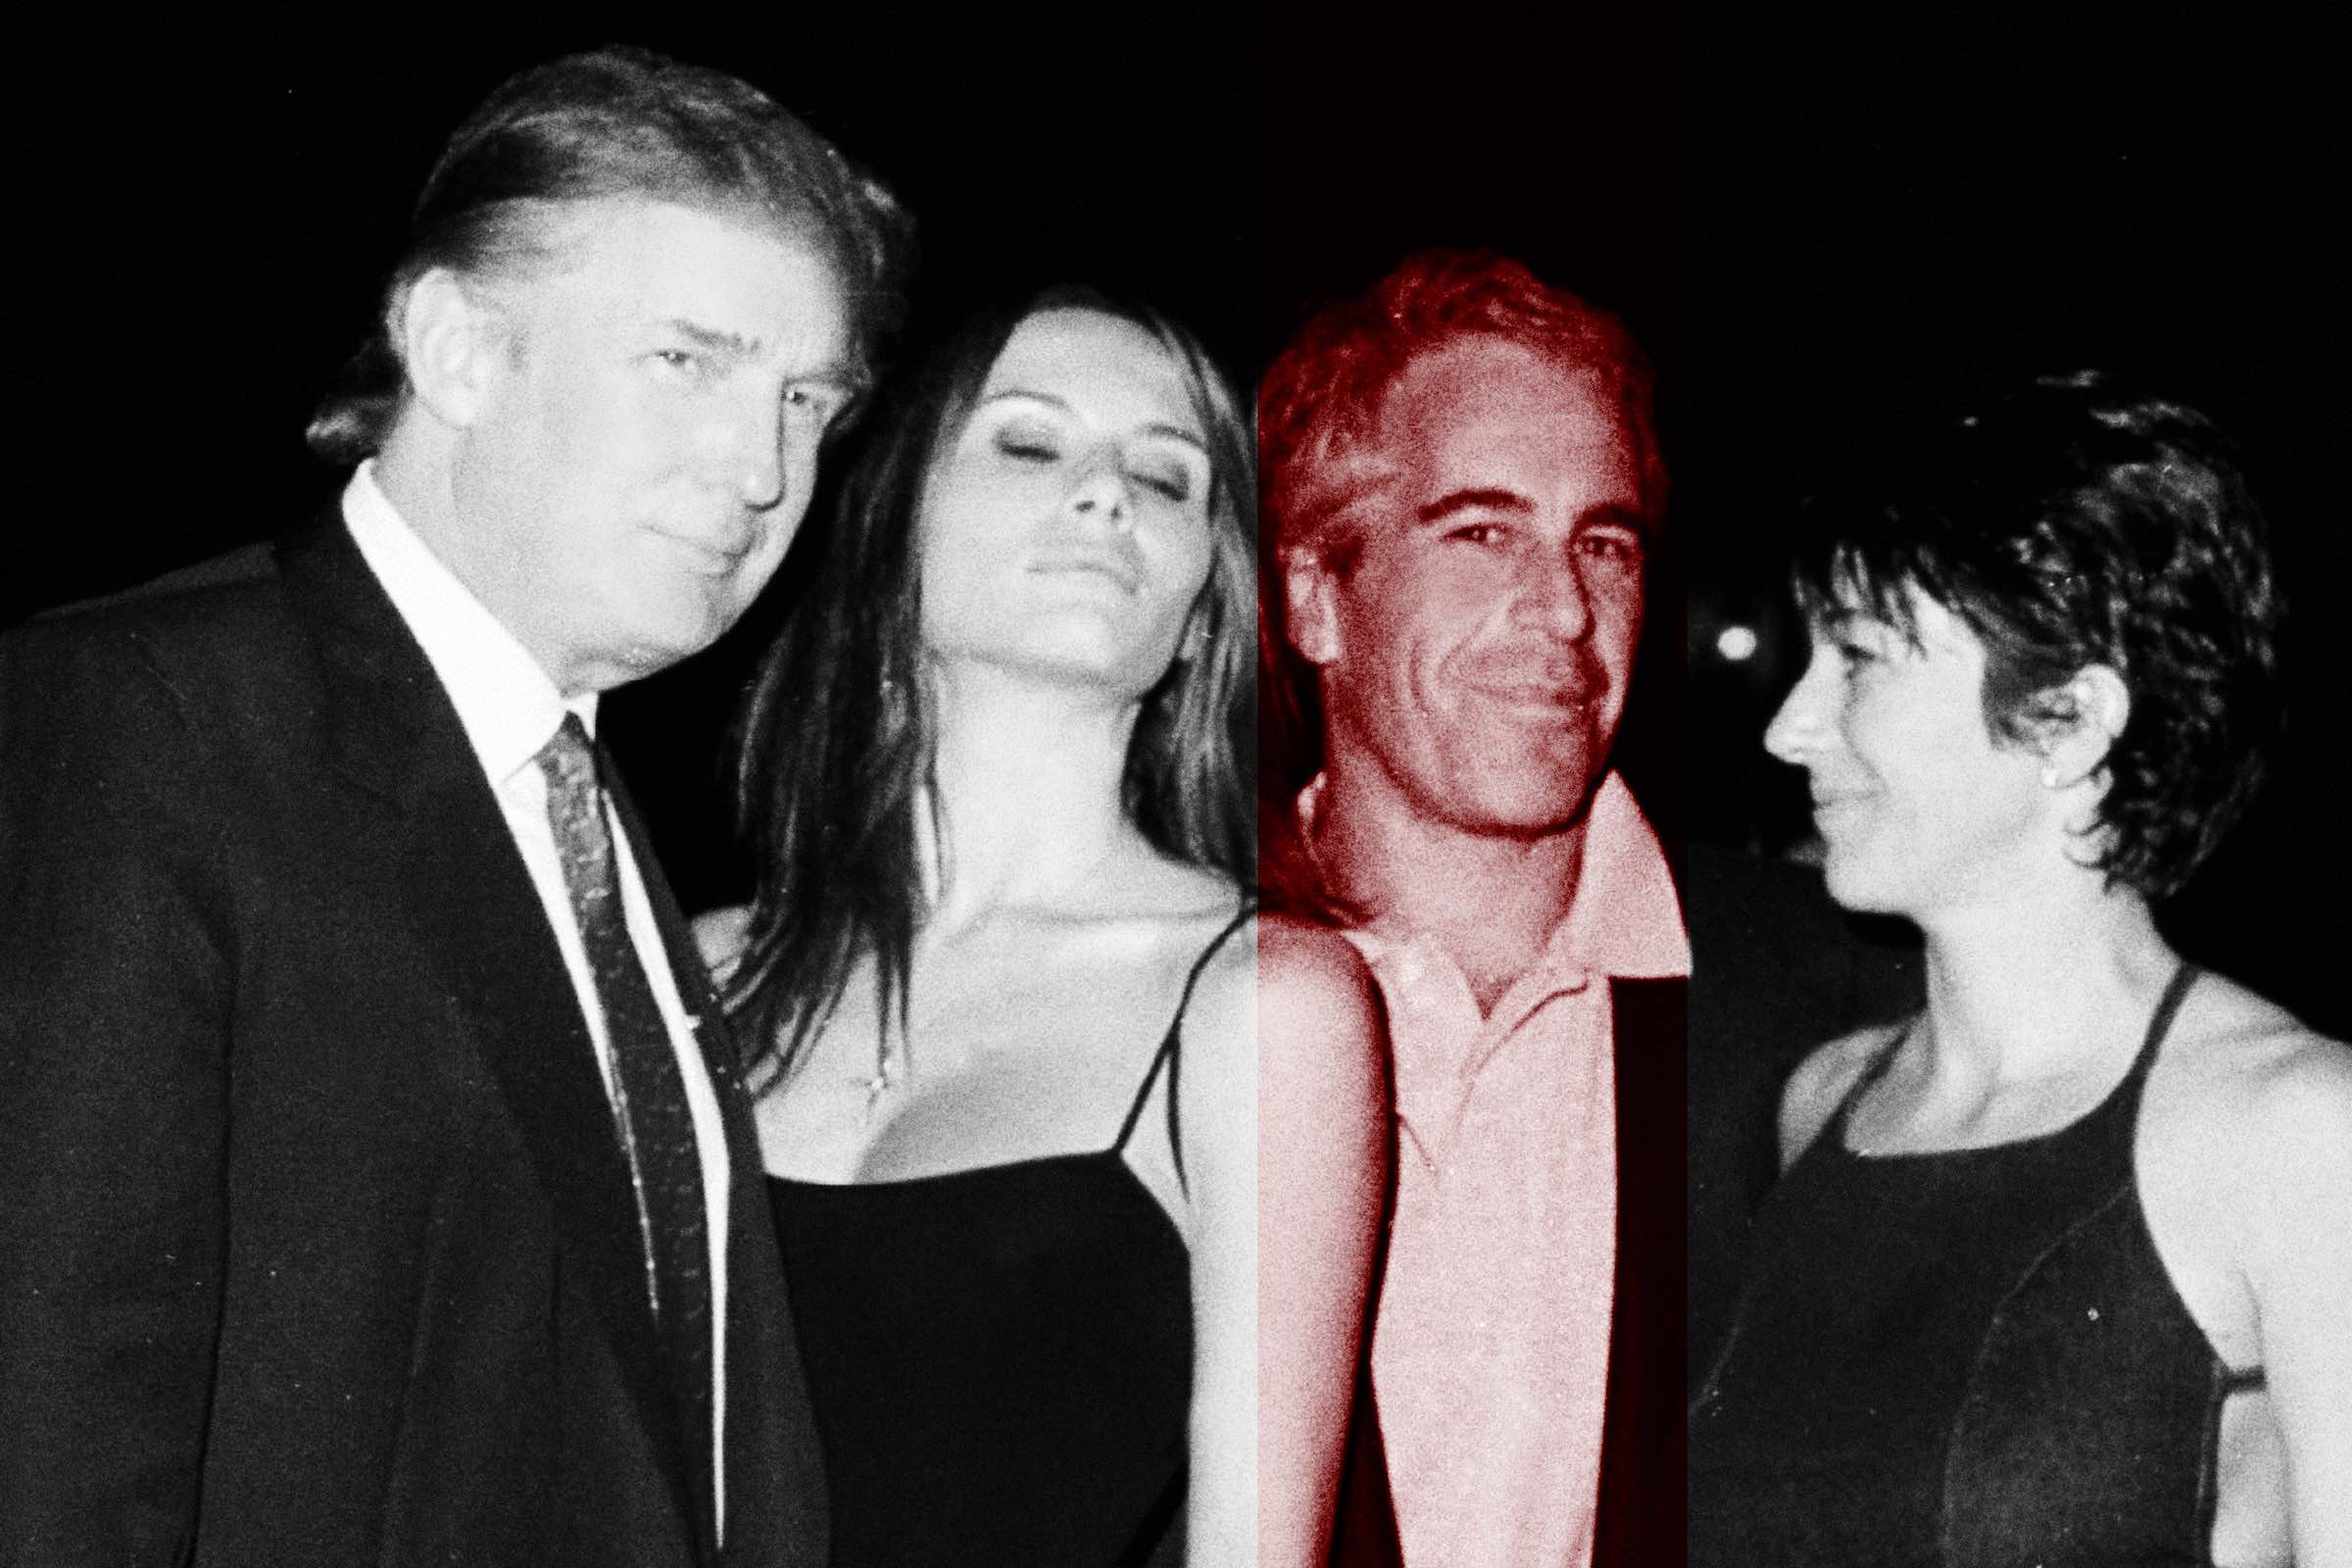 Sure, everyone is convinced that Jeffery Epstein didn't kill himself. But the death of Jeffrey Epstein is truly shrouded in mystery. What exactly happened?